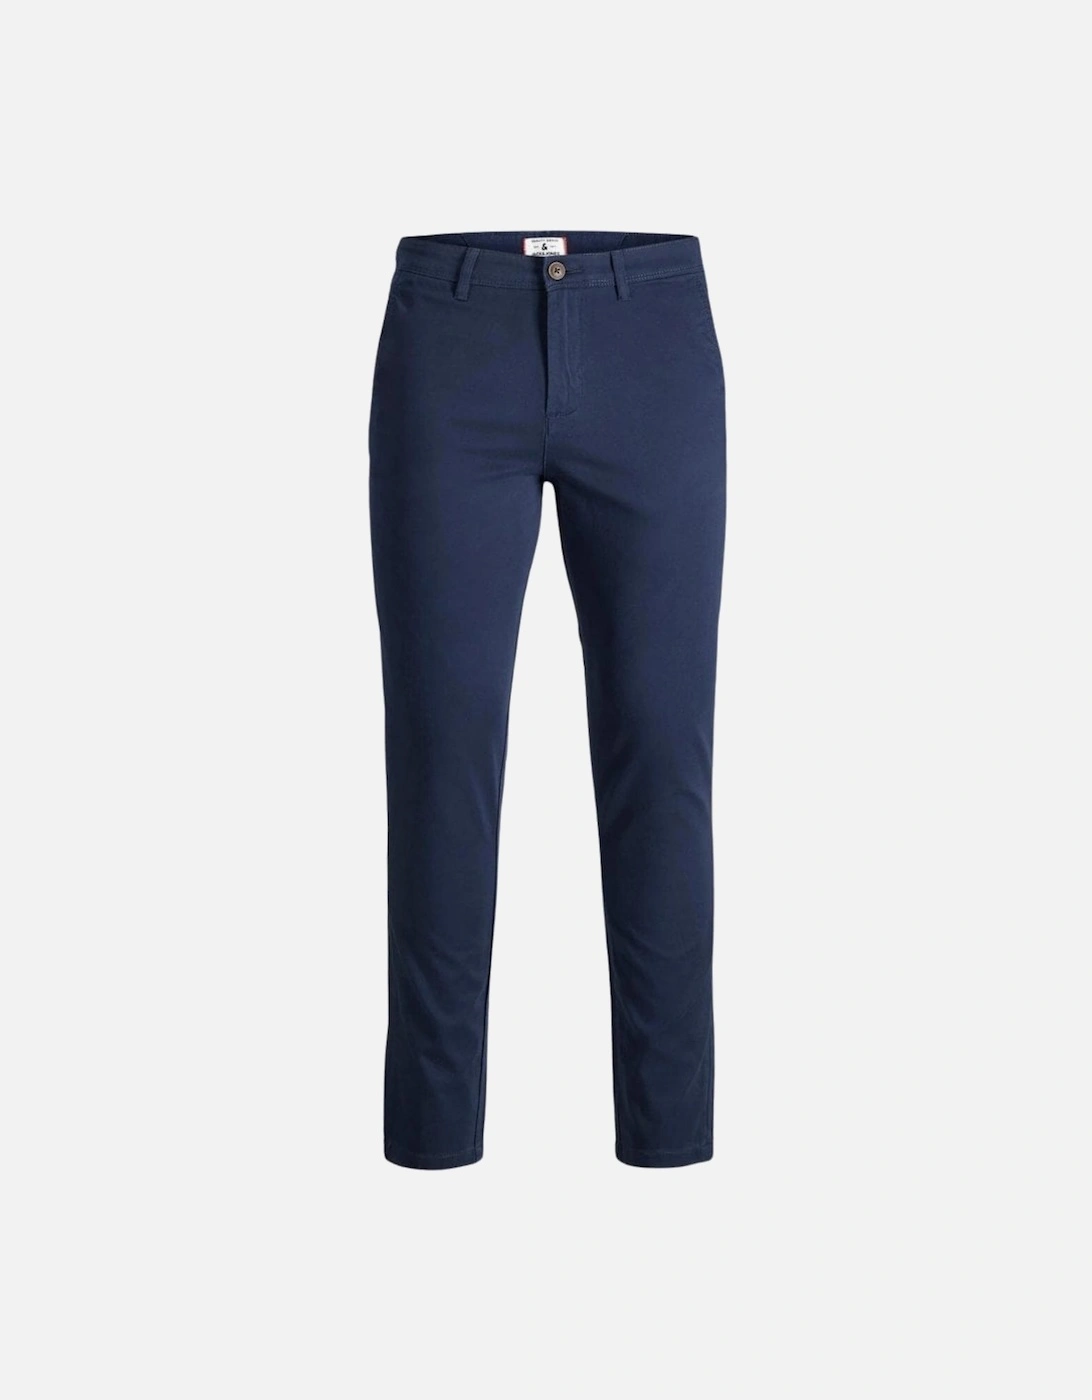 Marco Chinos - Navy, 9 of 8